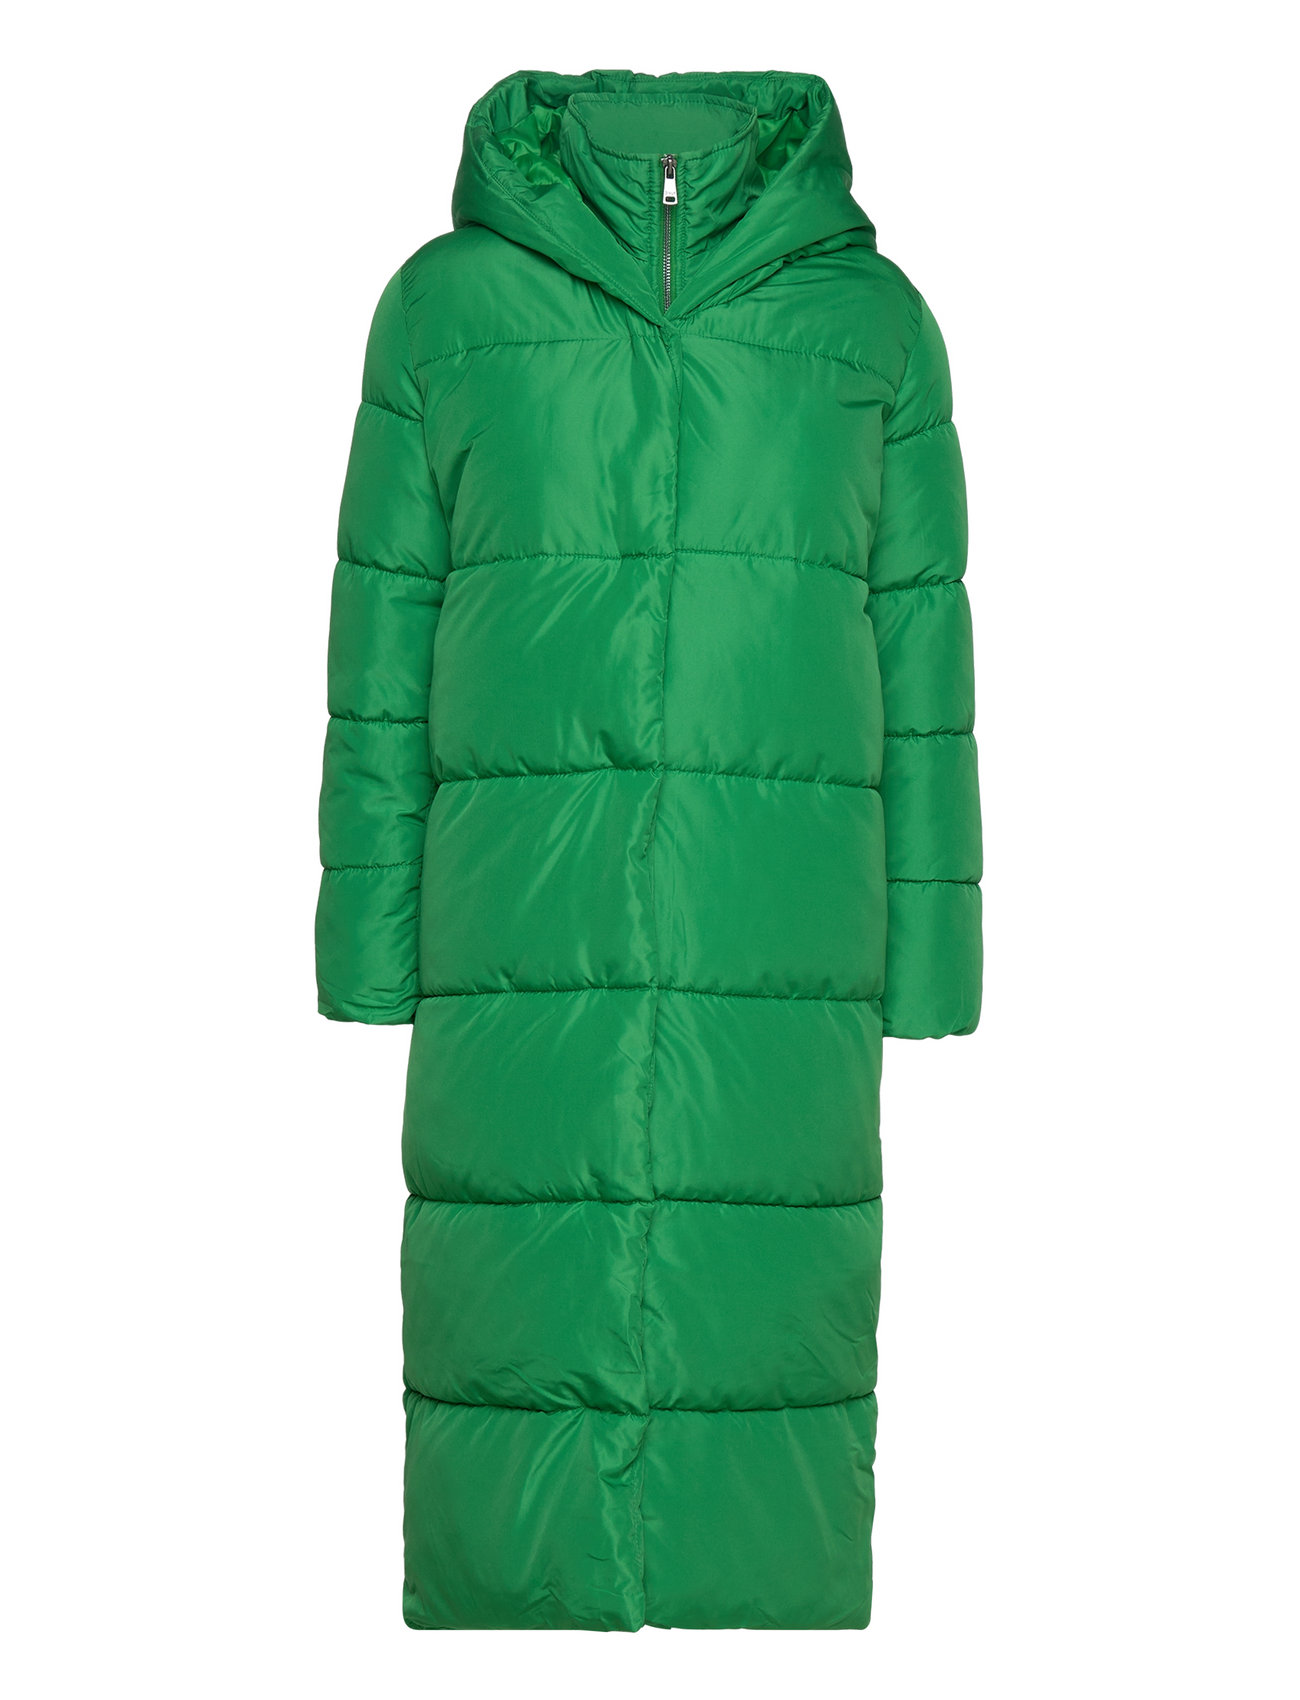 Fast Coat Coats ONLY €. online delivery Buy returns - 89.99 Onlamy Padded X and Otw from Long easy Boozt.com. ONLY at Puffer